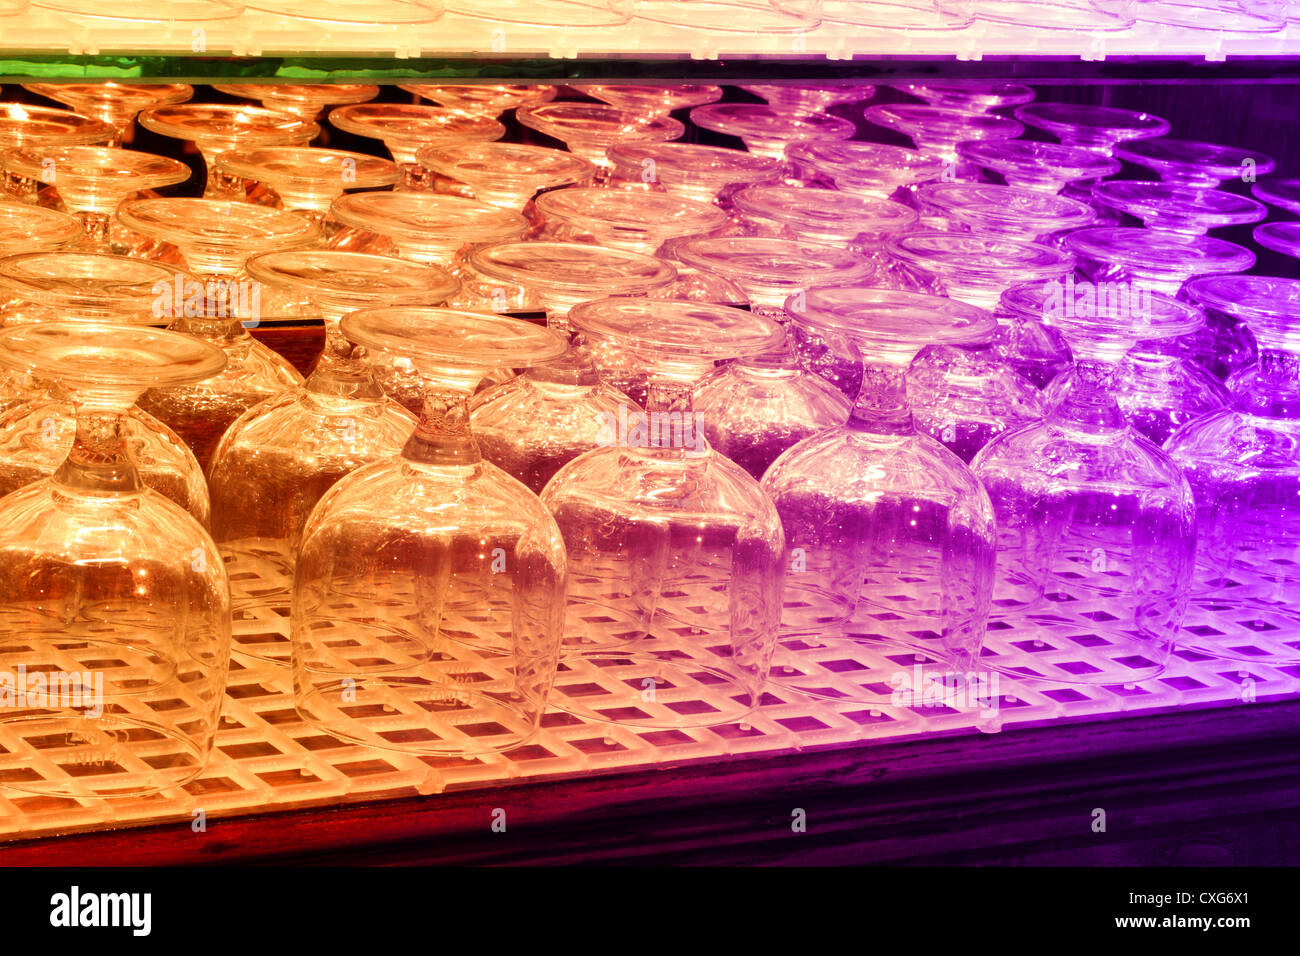 A background image of drinking glasses on a pub shelf, which is lit by colored lights Stock Photo